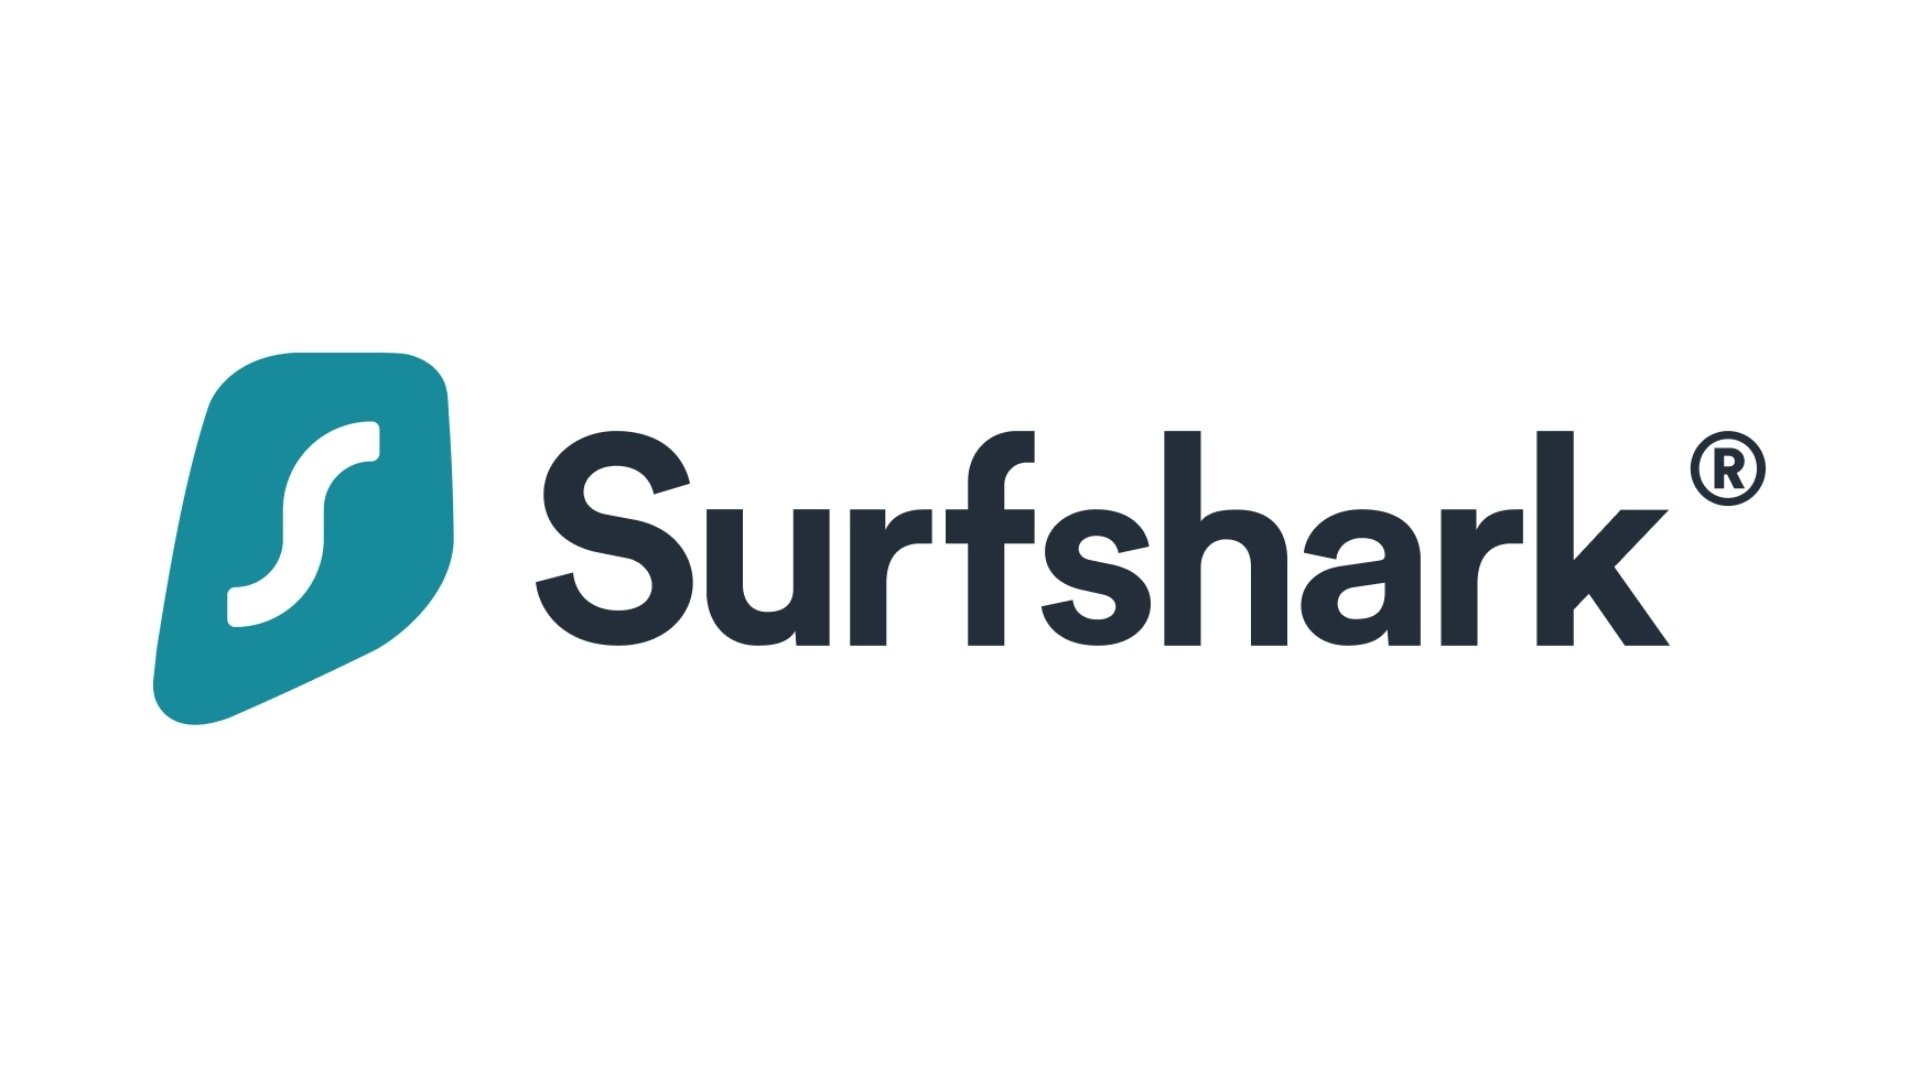 Best VPN for streaming, Surfsharkl. Image shows its logo on a white background.